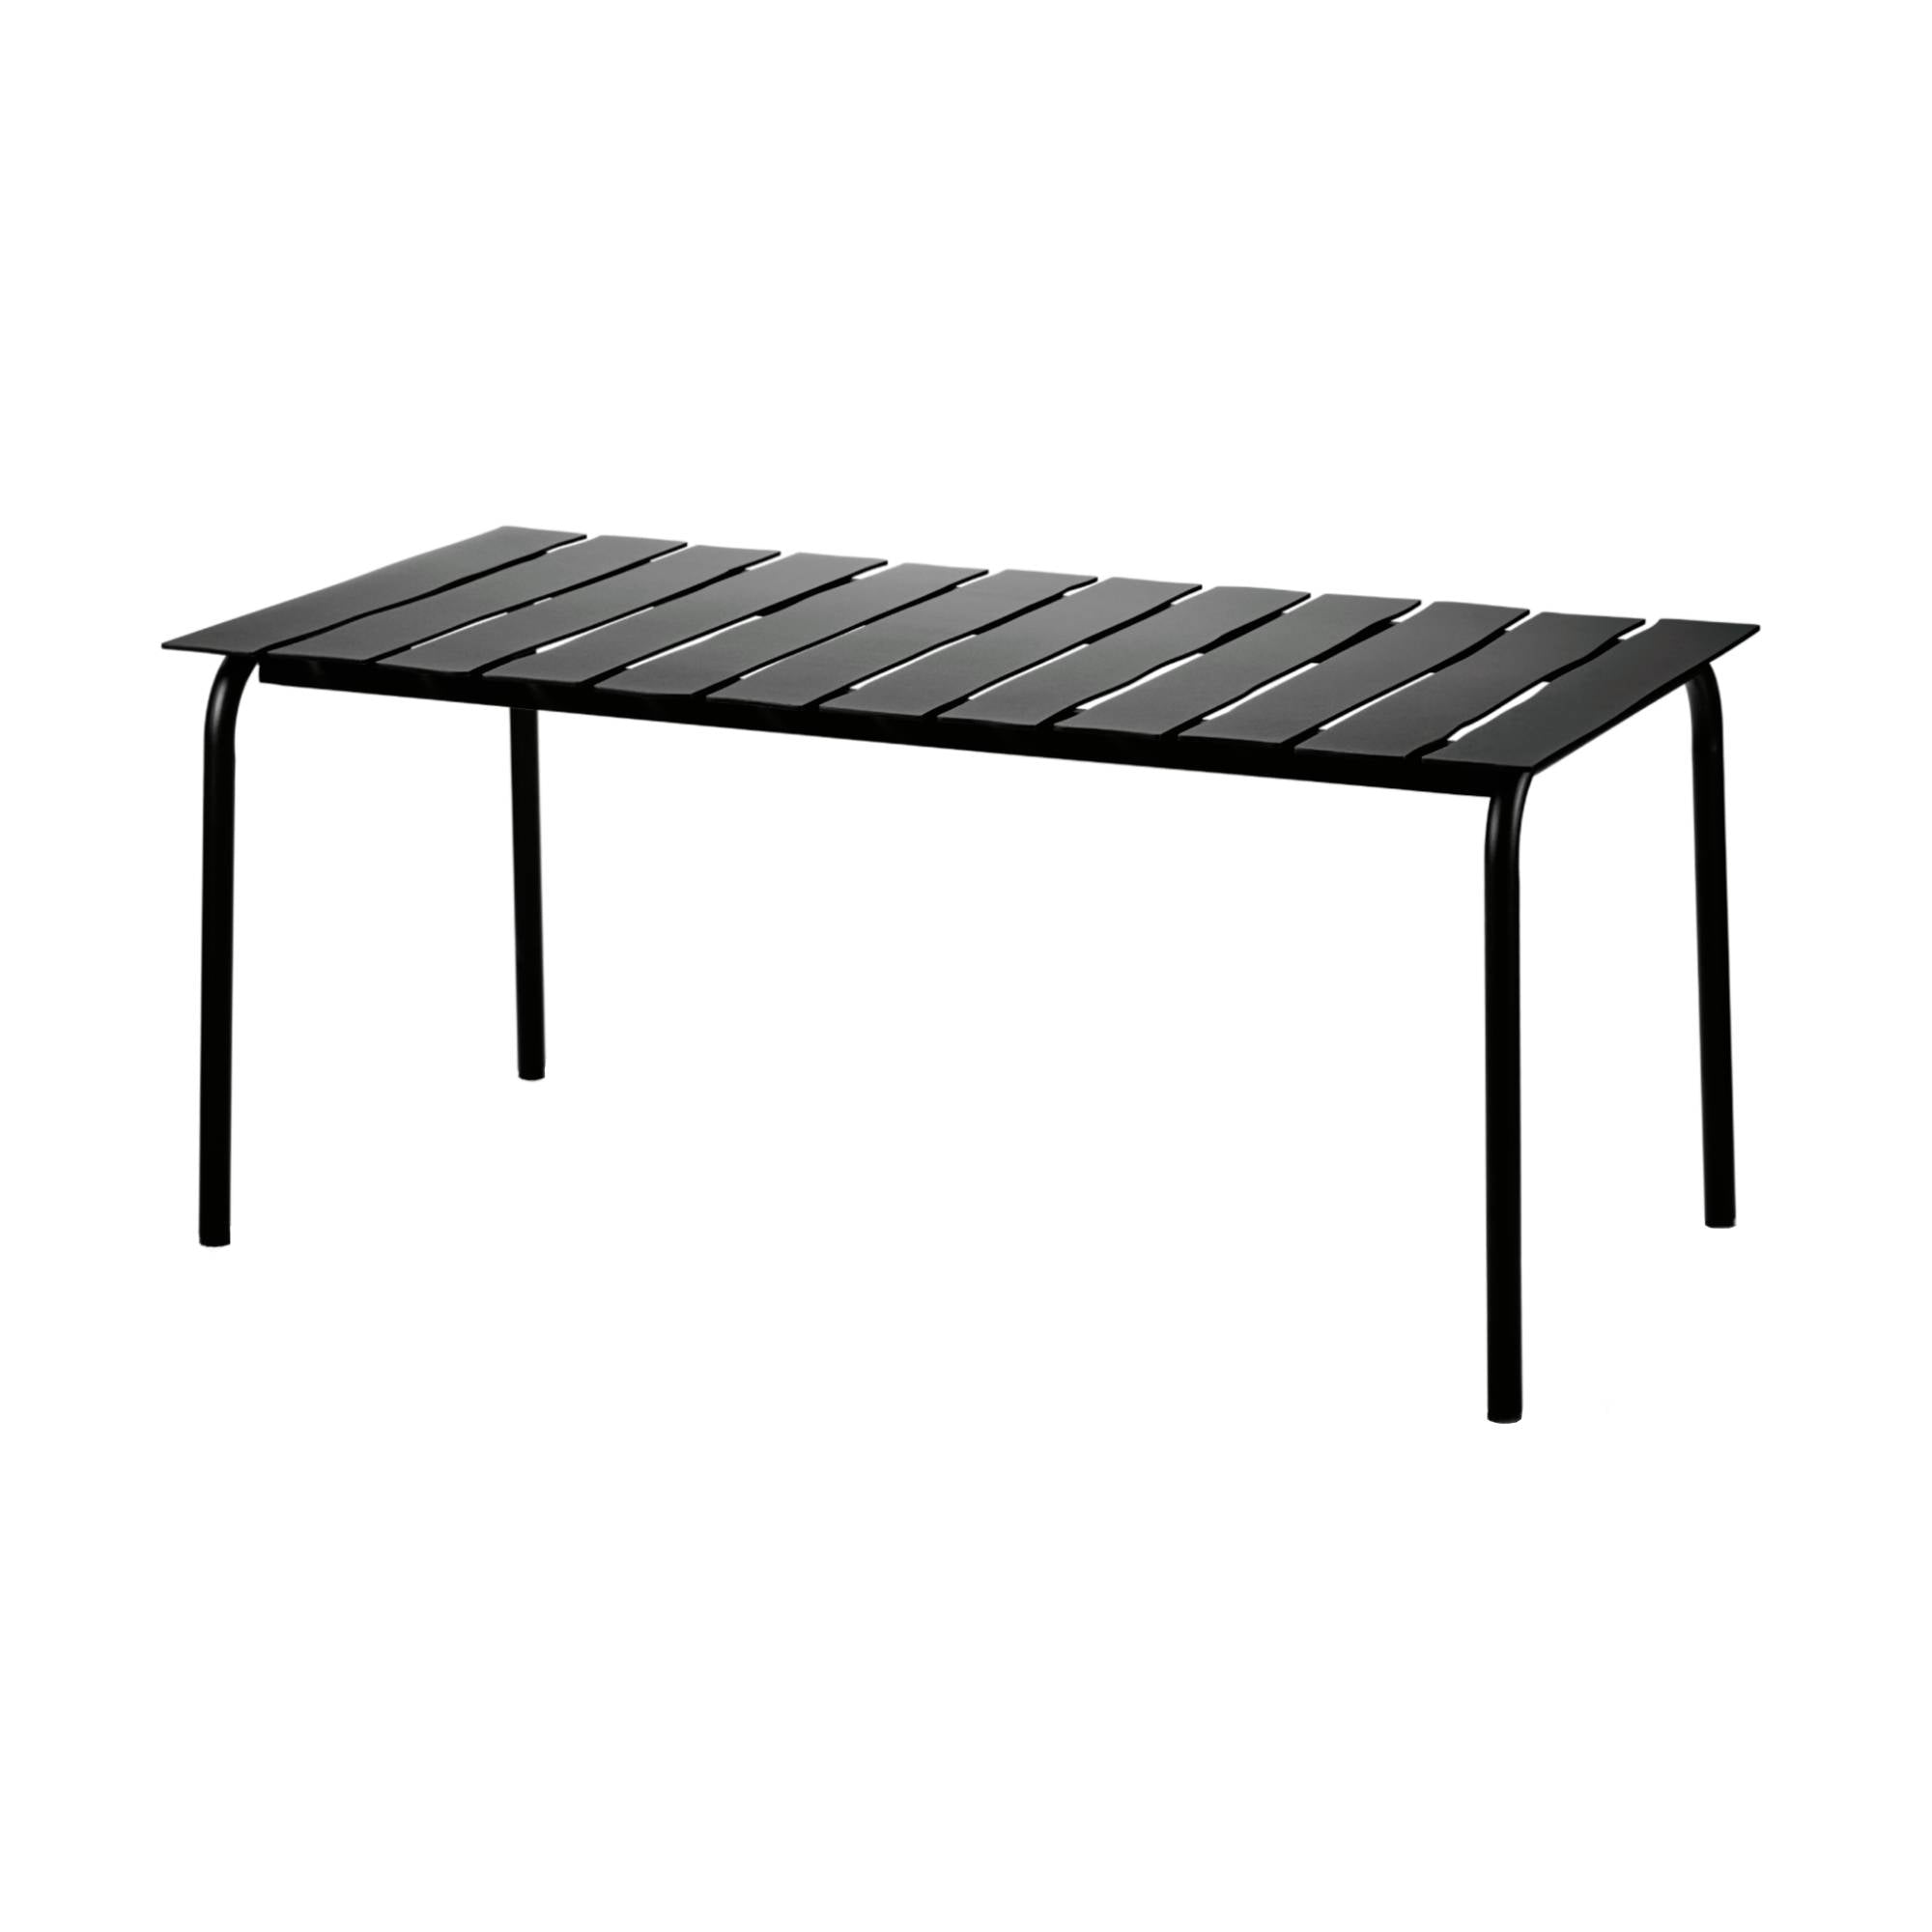 Aligned Outdoor Dining Table: Rectangle + Black